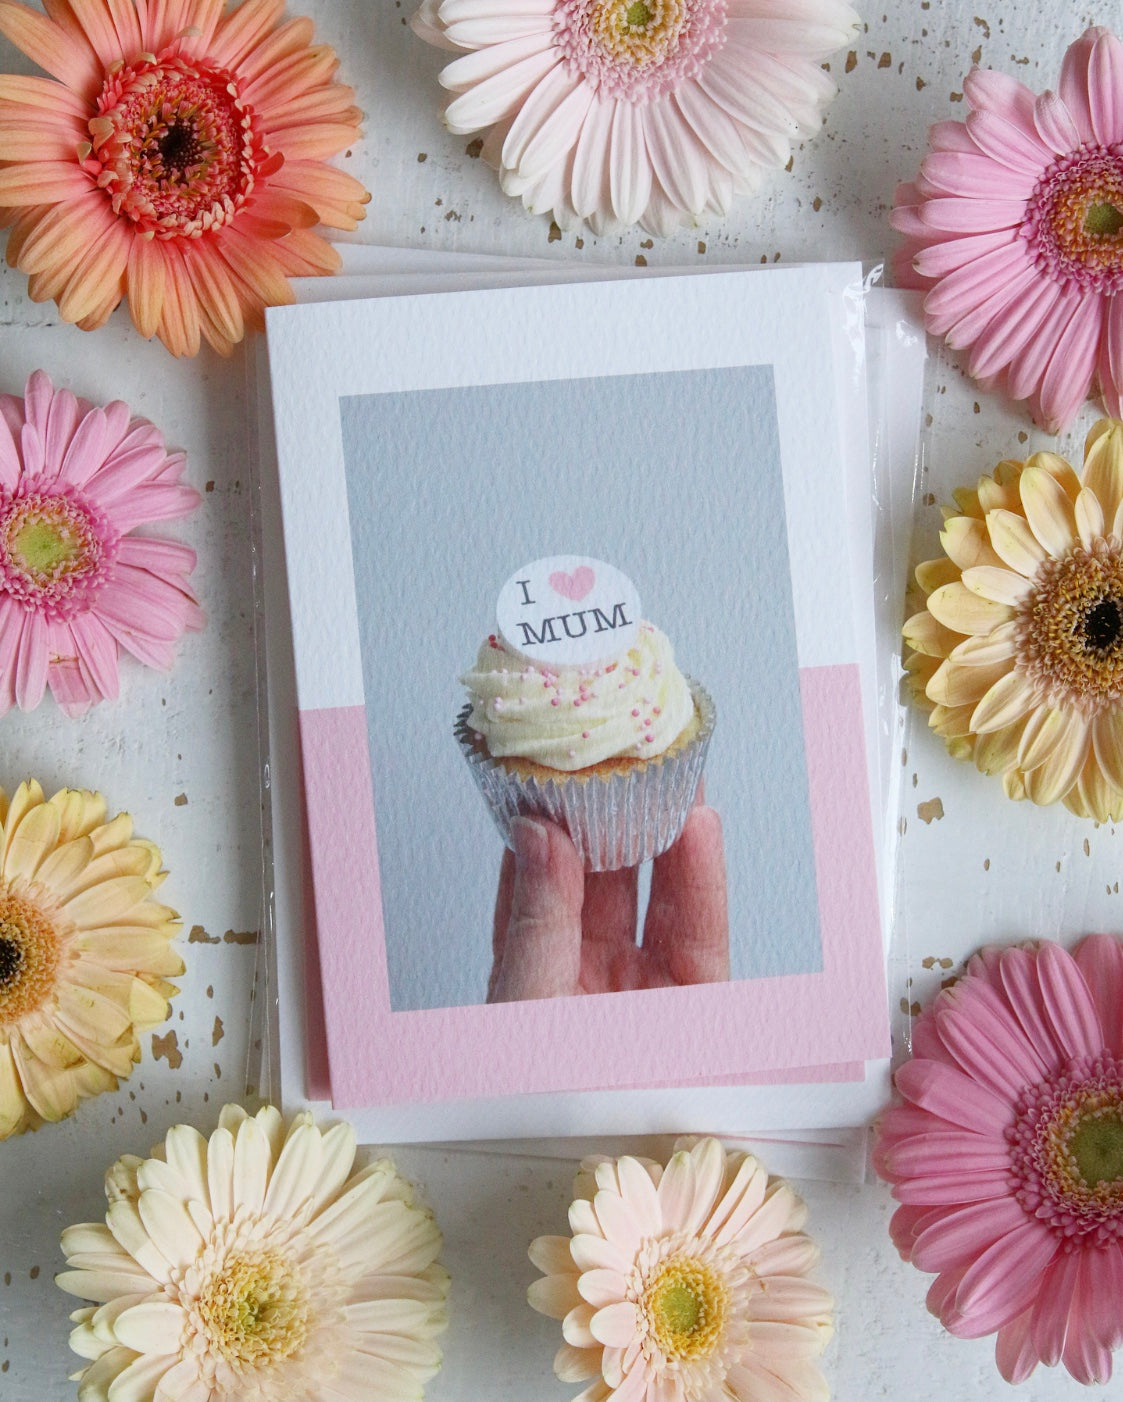 “I Heart Mum” Mother's Day Cupcake Photo Card with Flowers